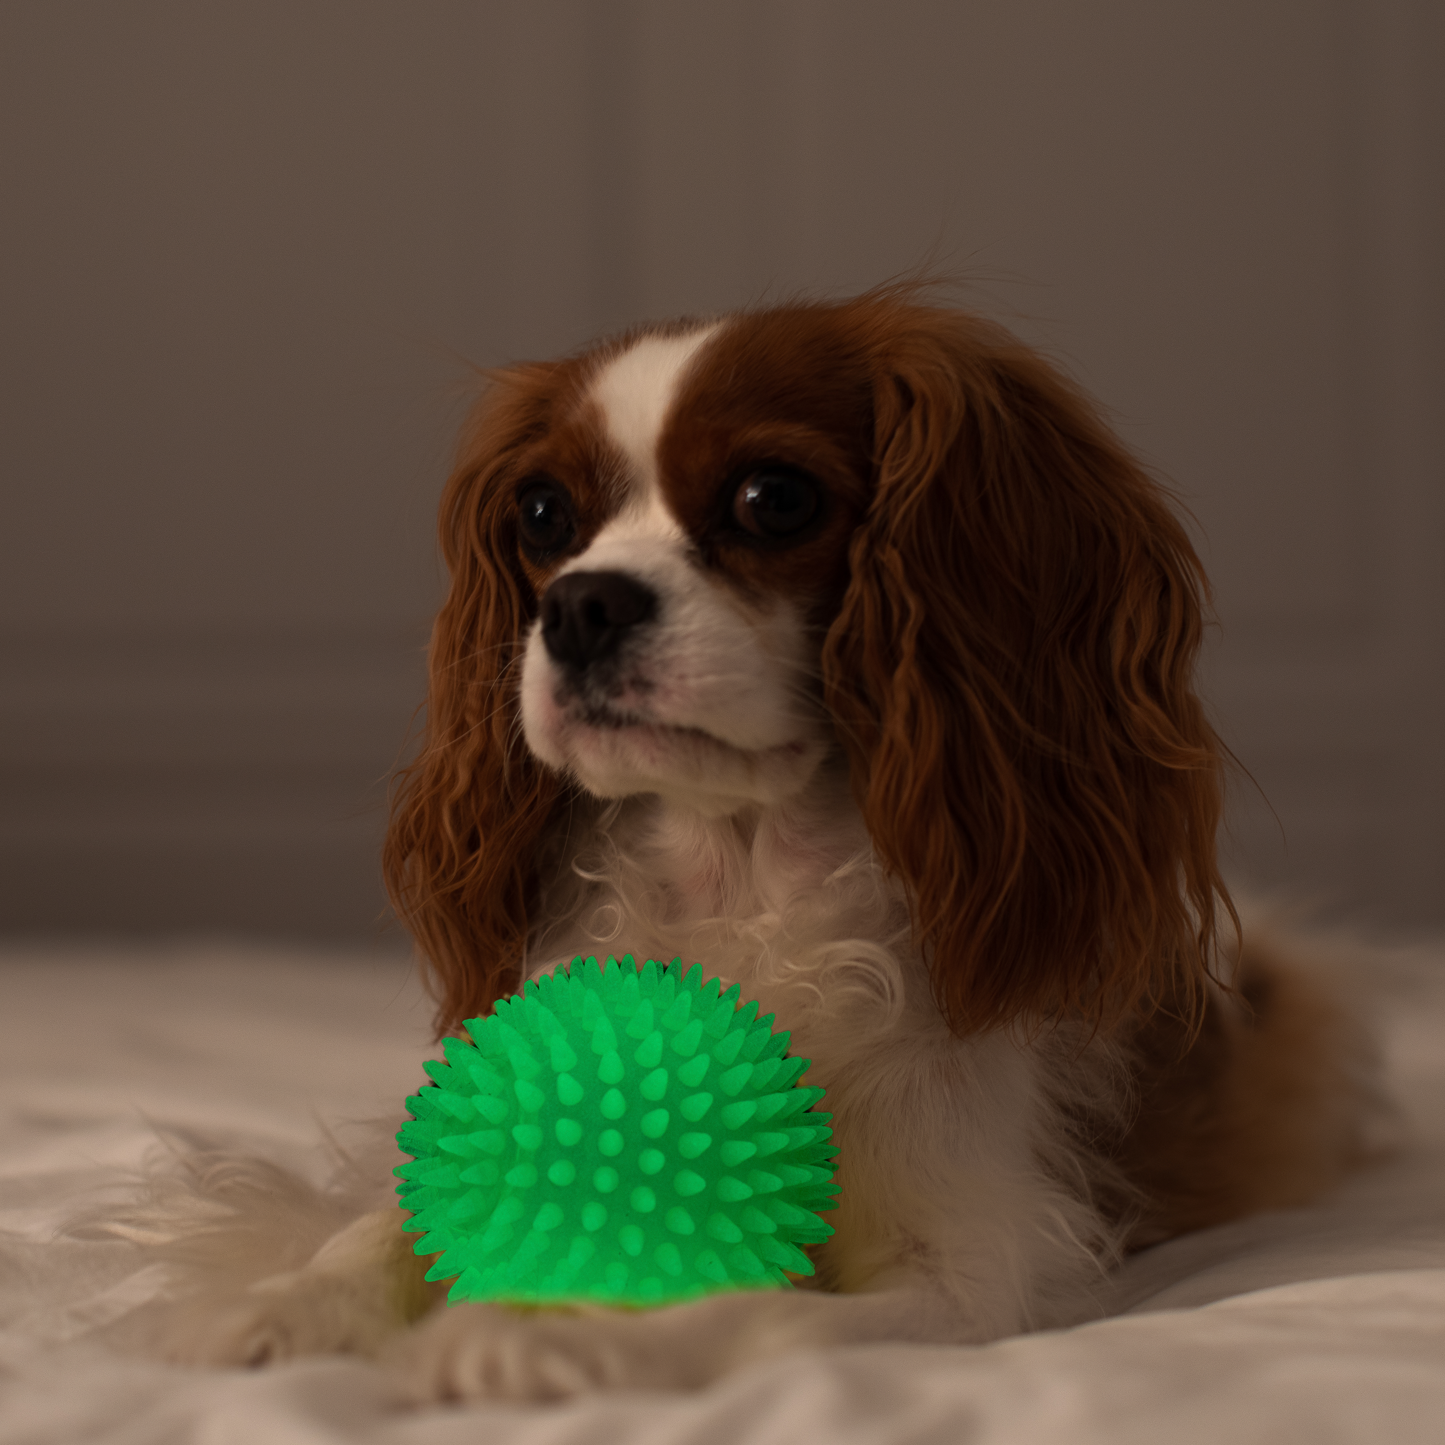 Spike chew ball for dog, glow in the dark rubber 